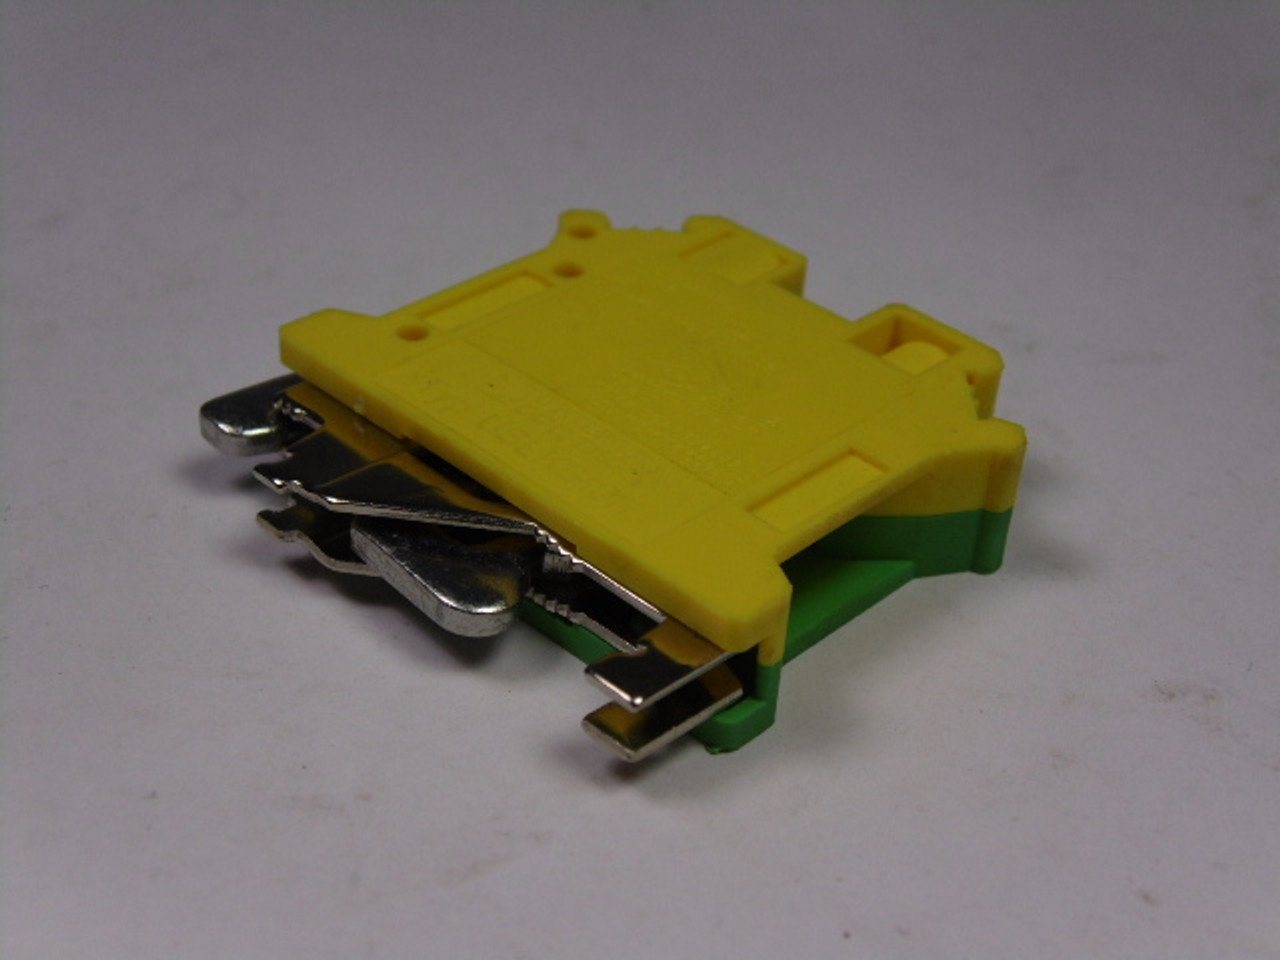 Phoenix Contact USLKG-10N Green/Yellow Ground Terminal Block 24-6AWG USED